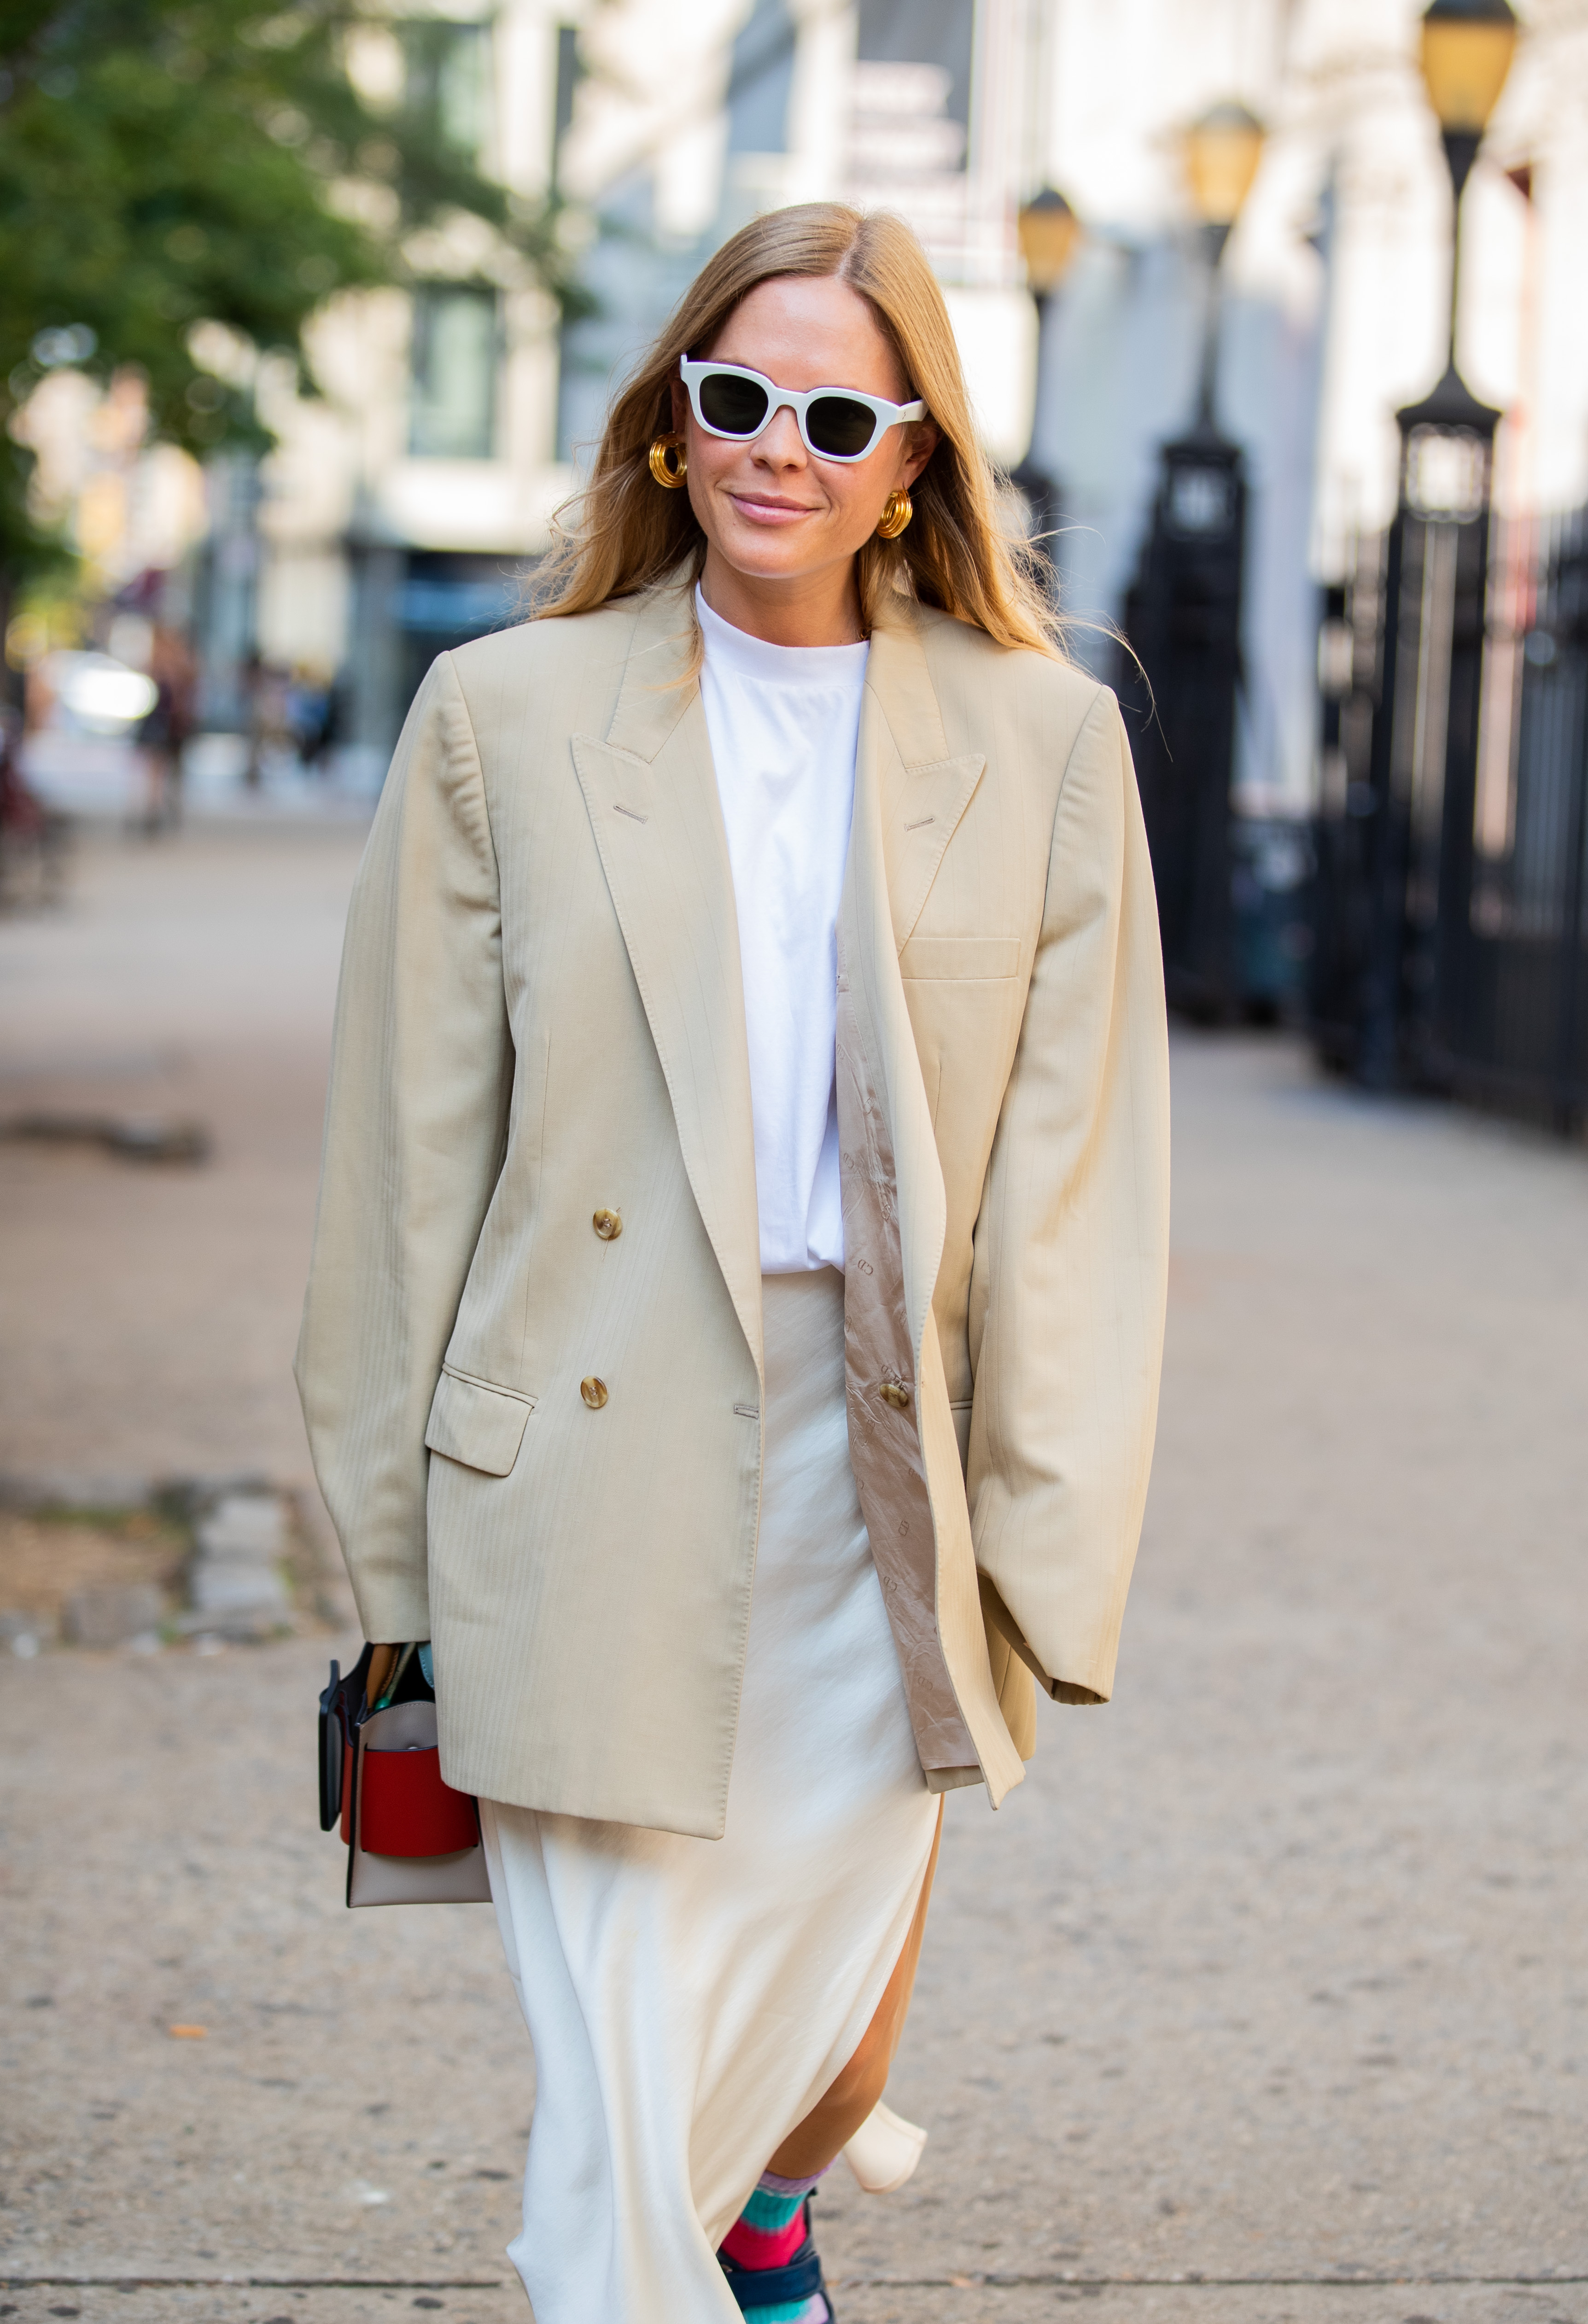 The Best Street Style To Inspire You For Spring - Grazia